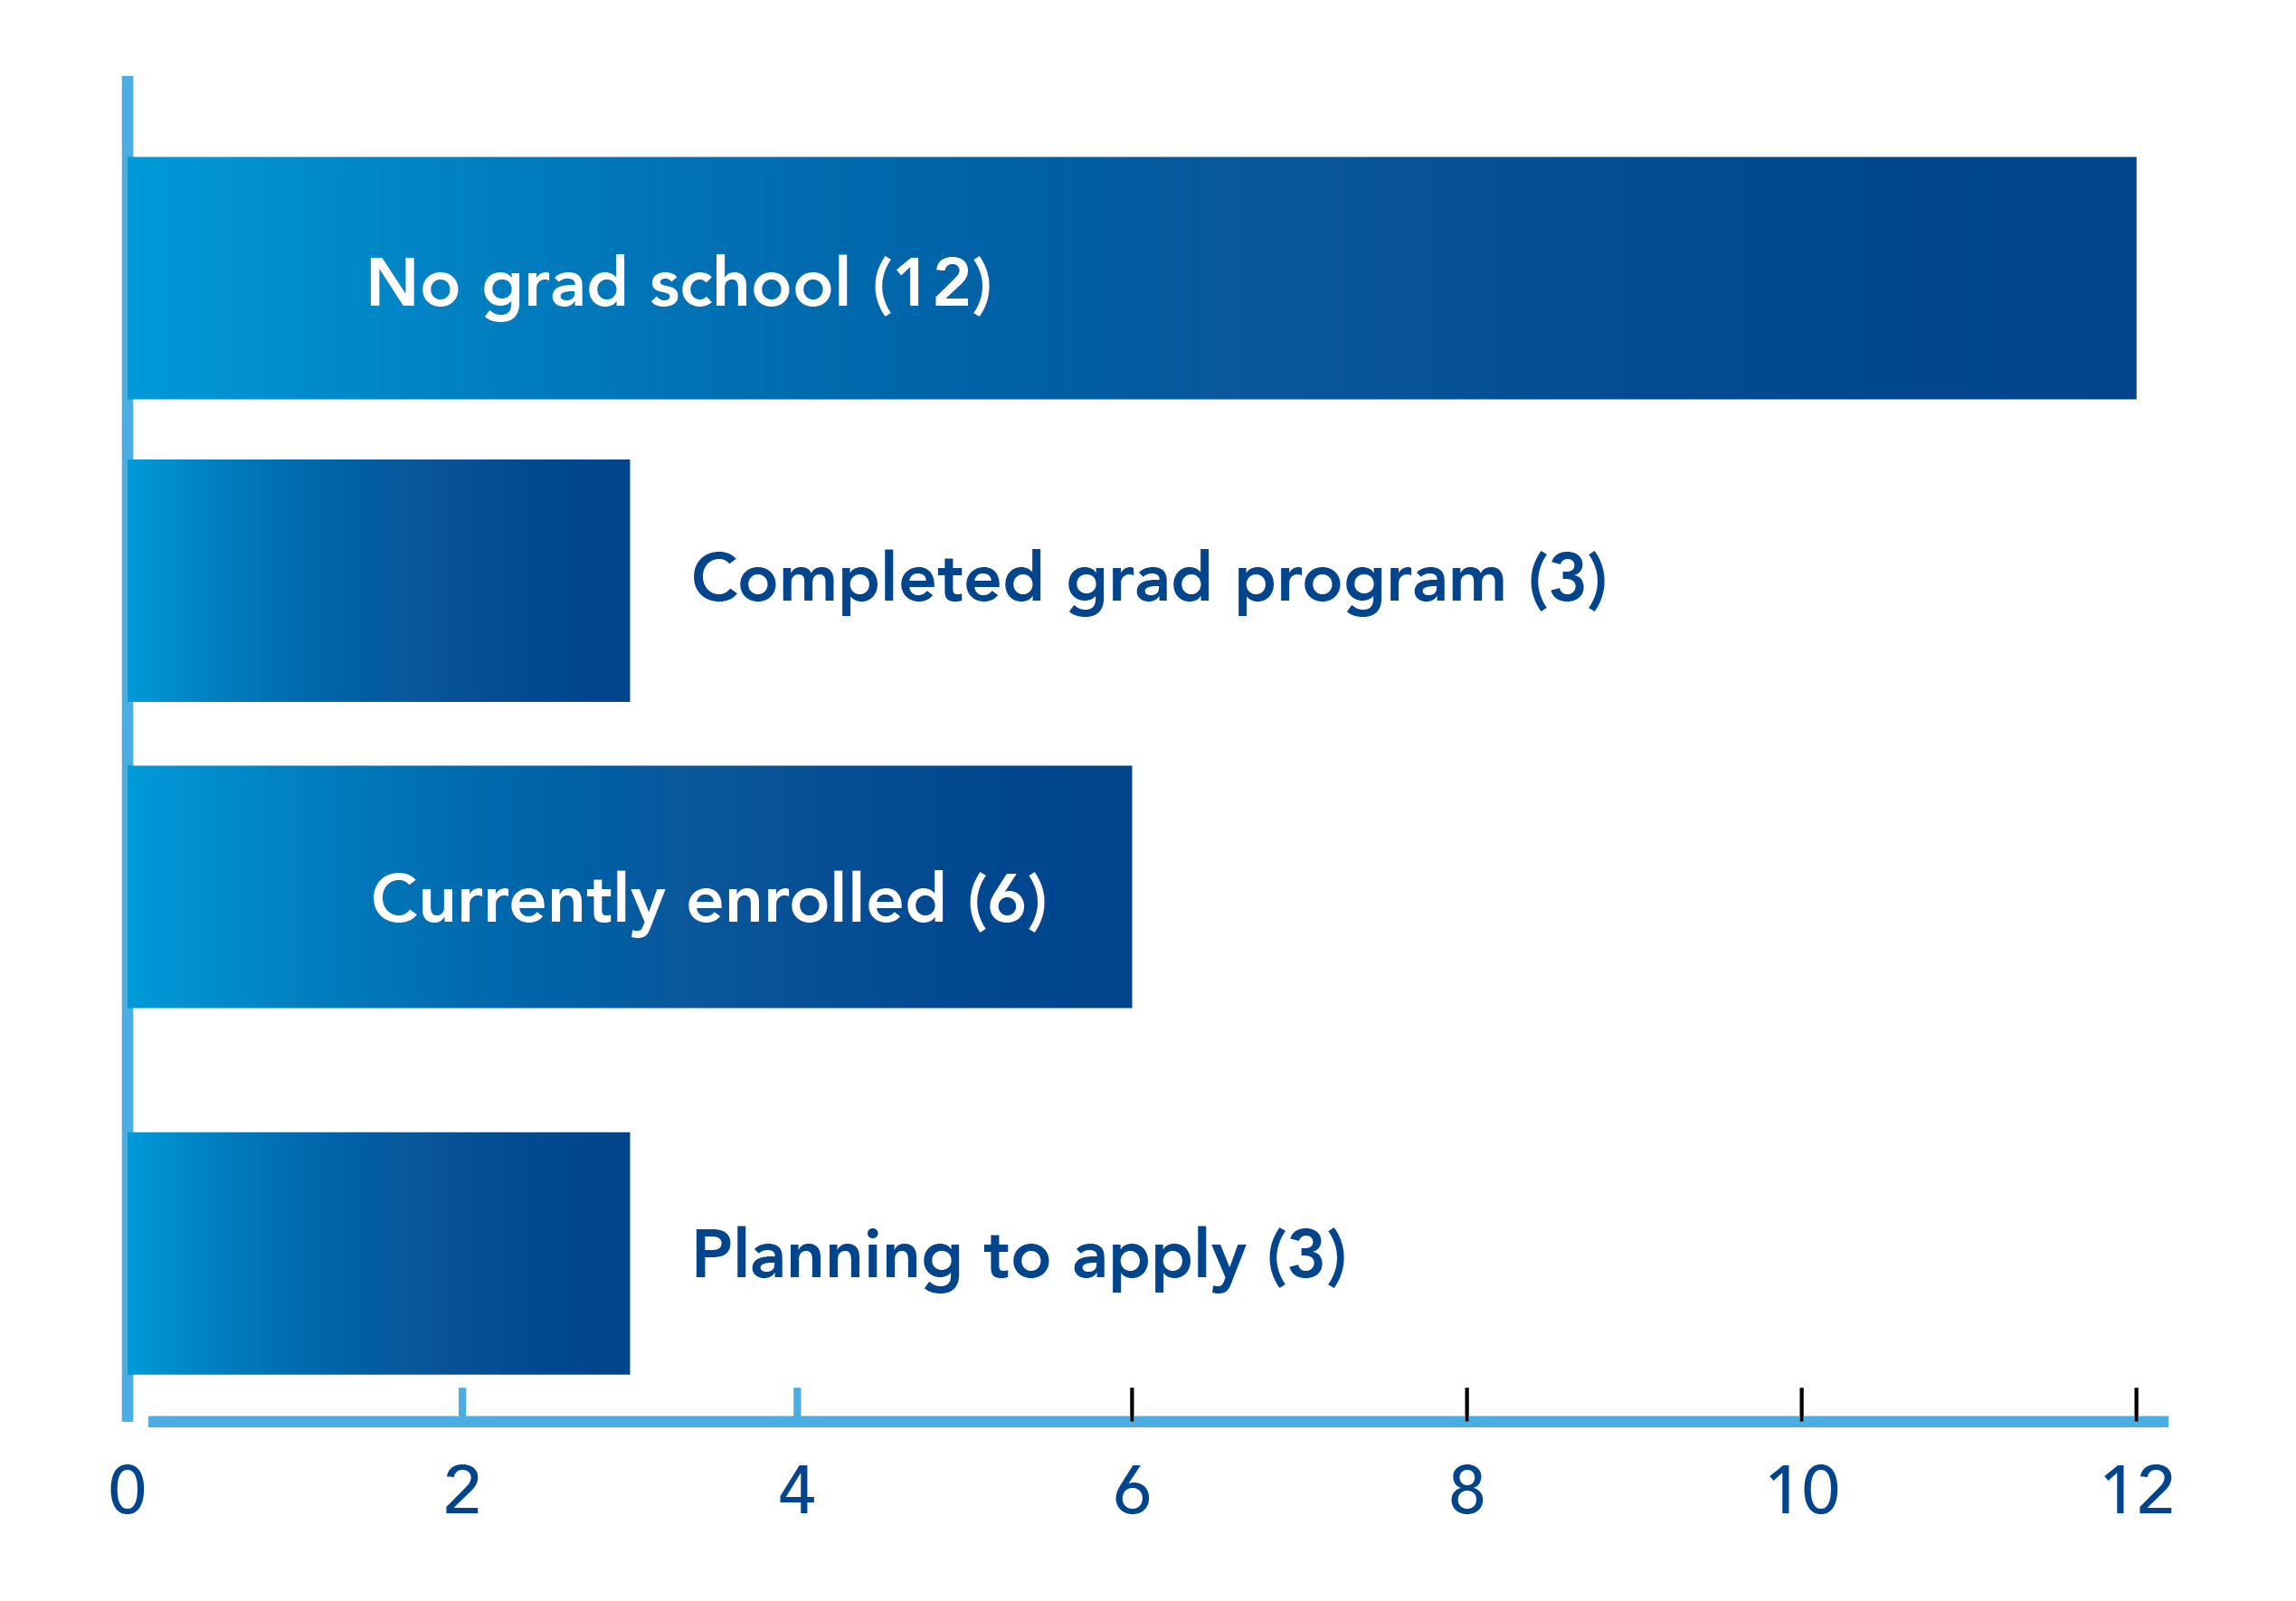 Bar Chart. No grad school (12), Completed grad program (3), Currently enrolled (6), Planning to apply (3).